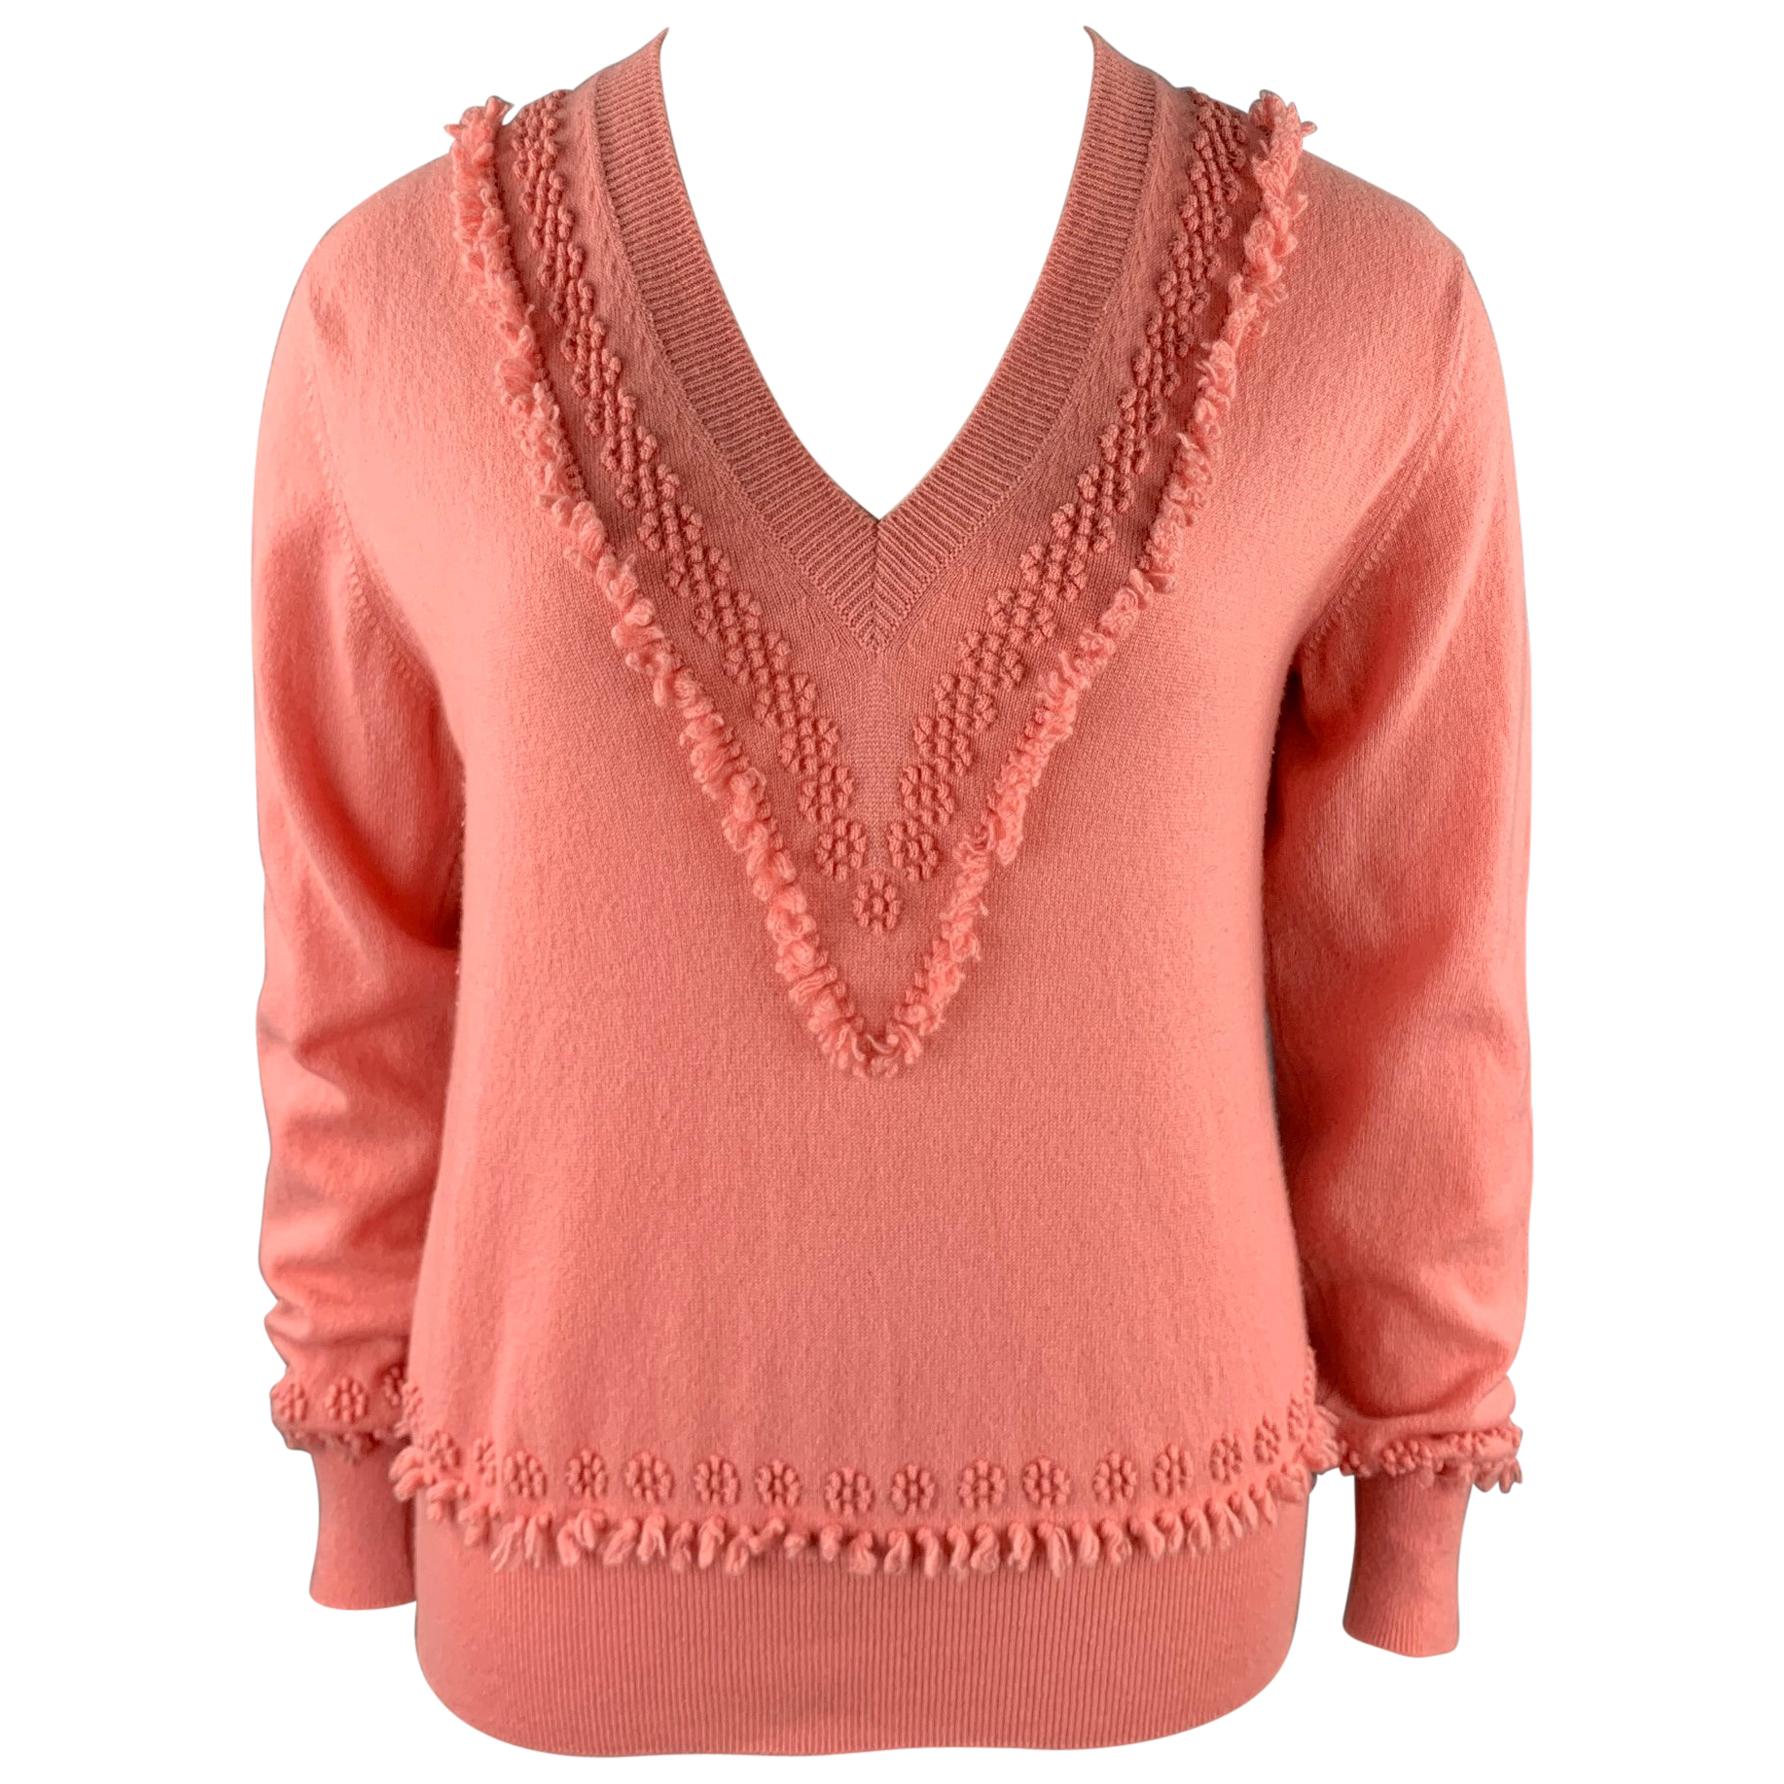 BARRIE Size XL Salmon Pink Knitted Cashmere Sweater